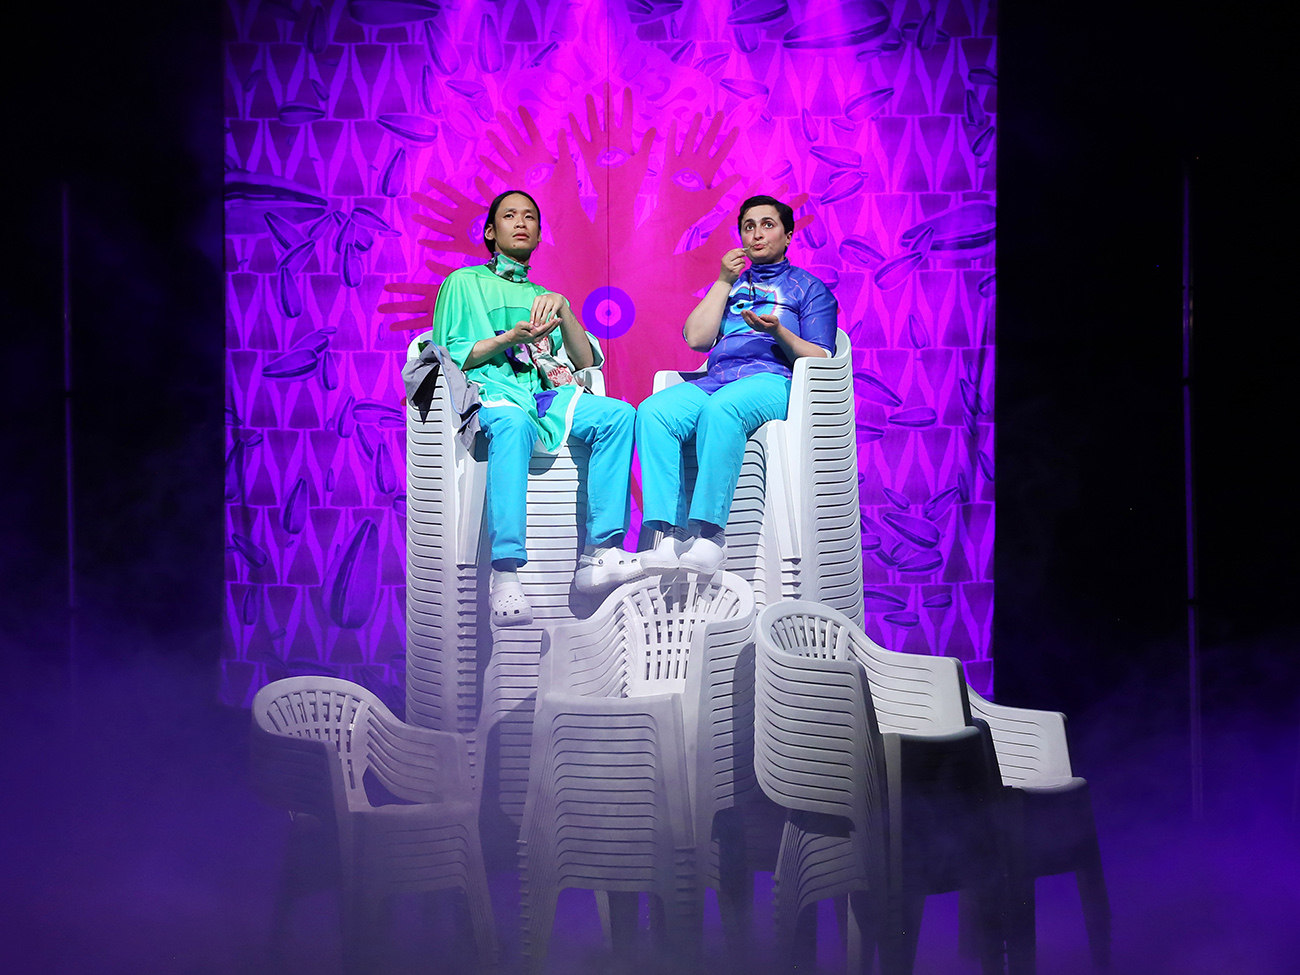 On stage, two people are sitting on a high pile of plastic chairs. Behind them is a bright purple curtain.